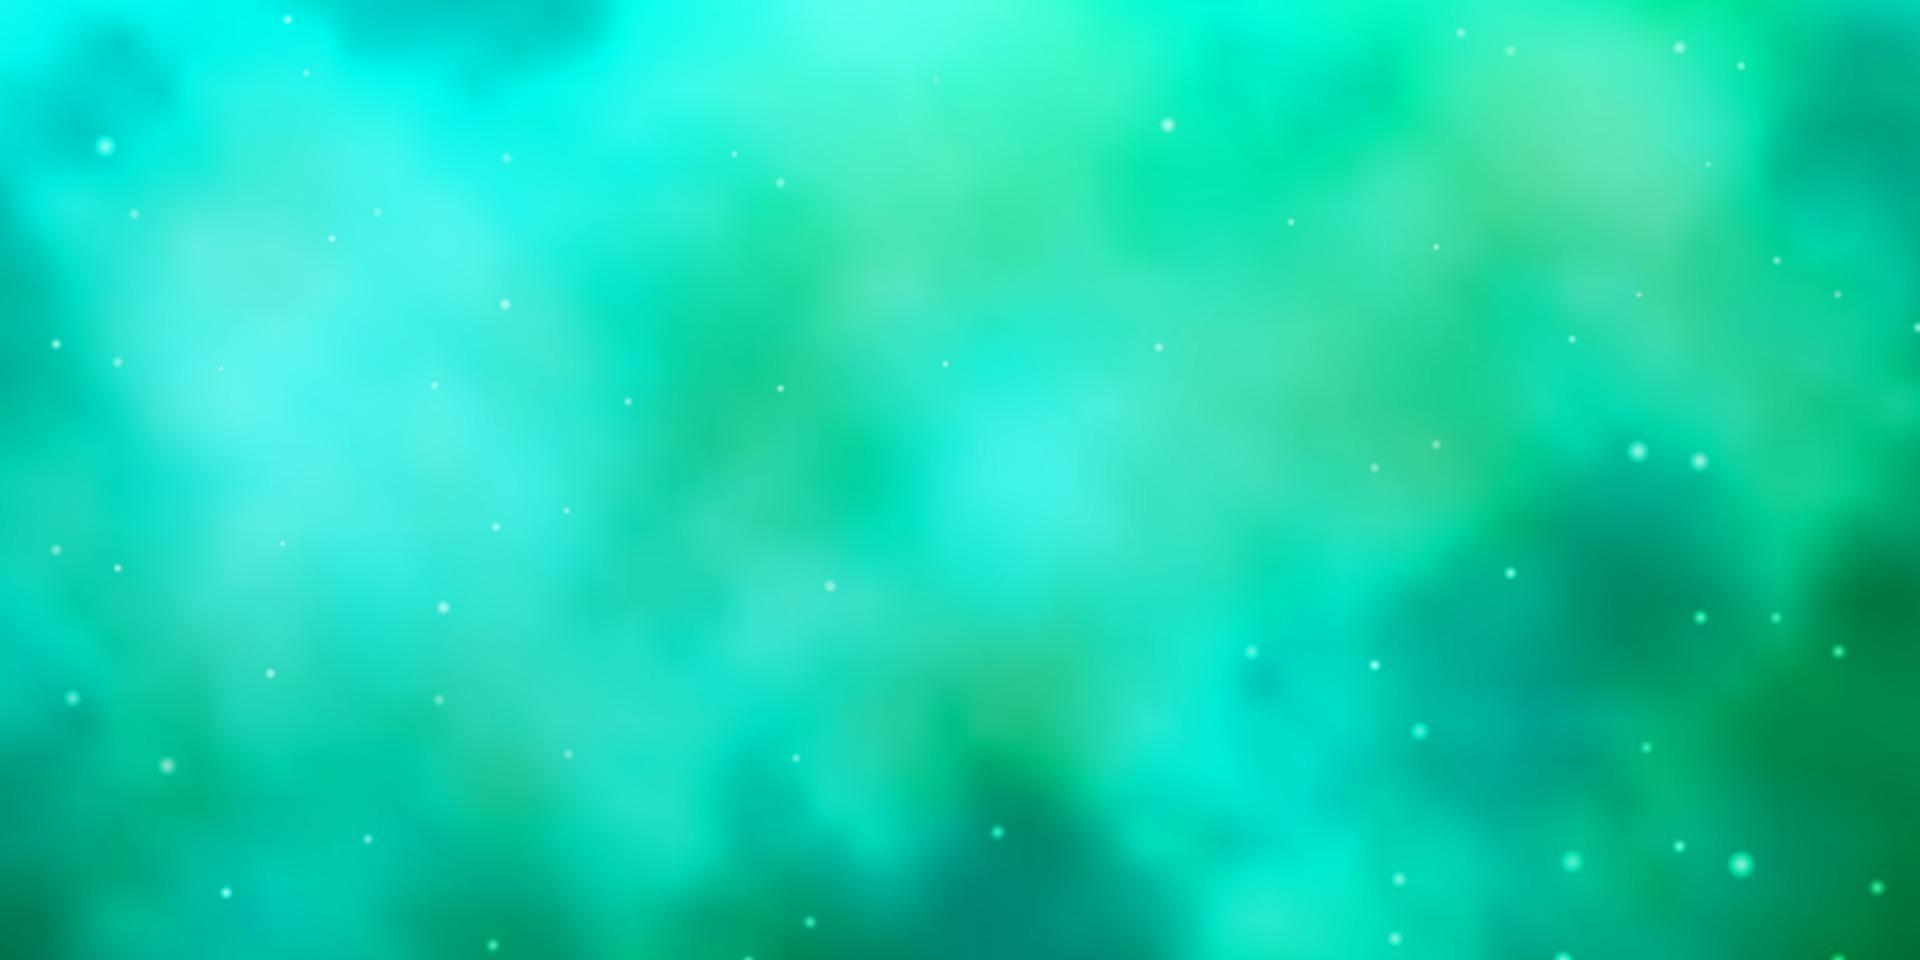 Light Green vector background with small and big stars.